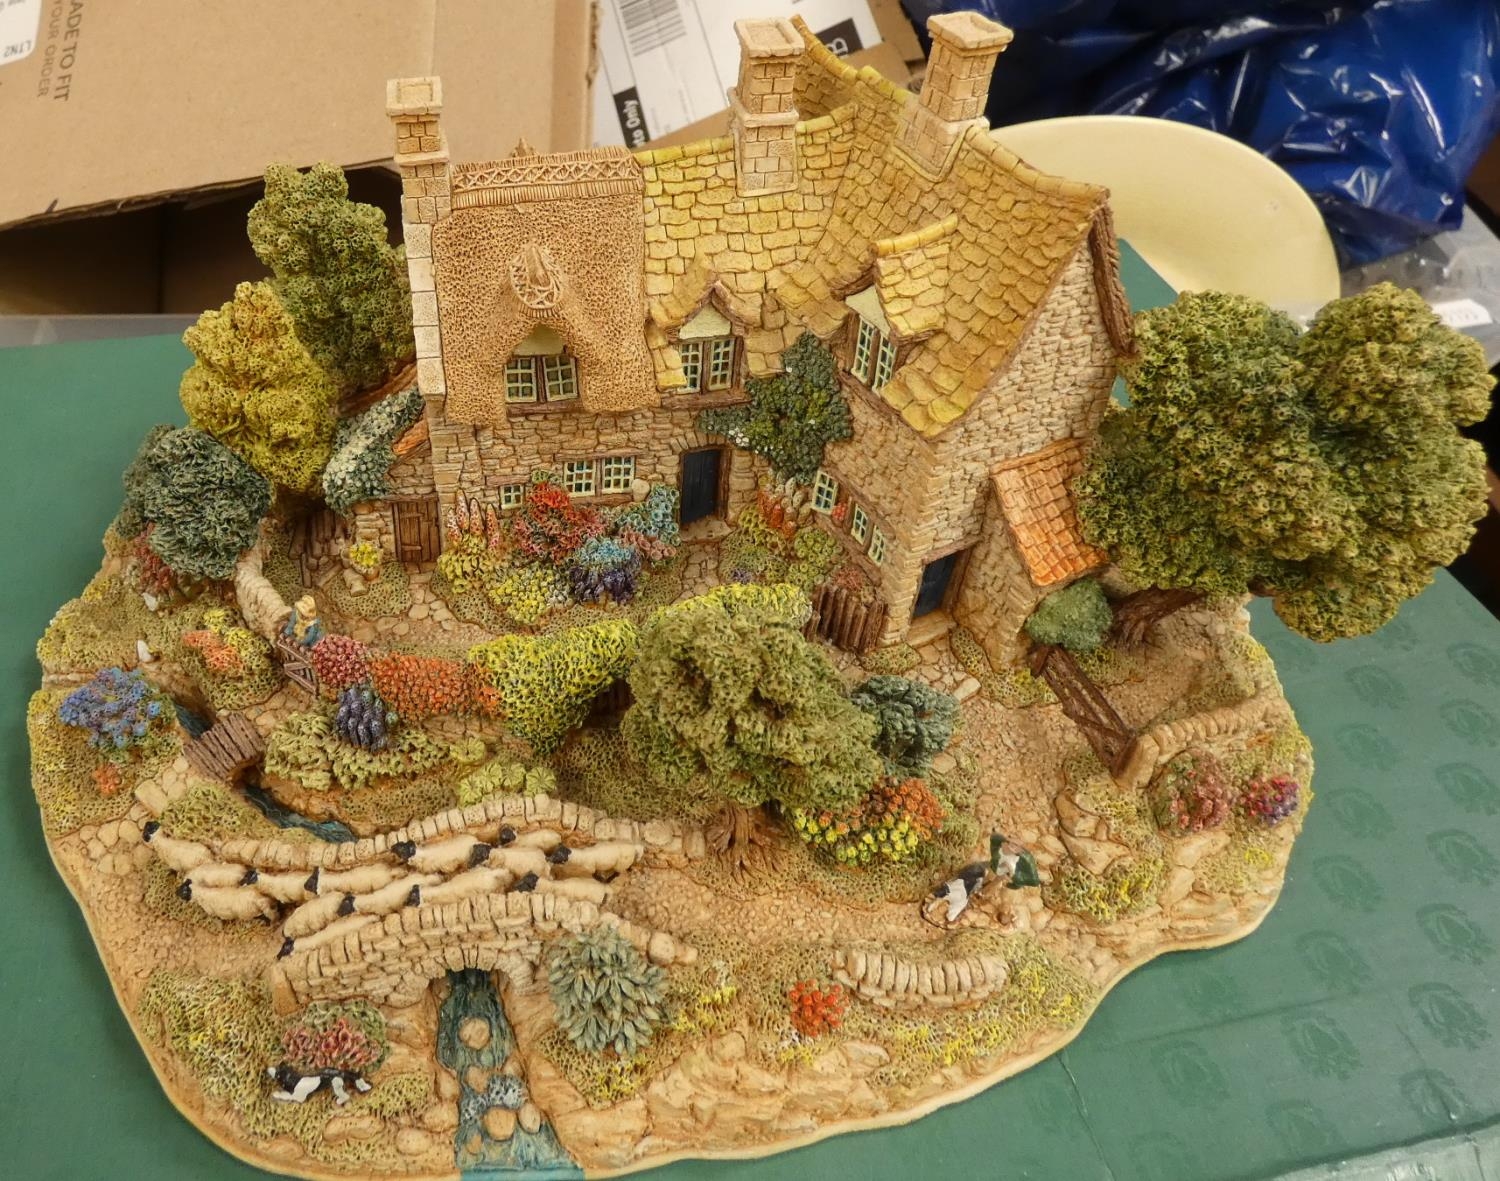 Lilliput Lane 'Pasture's New' and 'Old Mother Hubbard's' wih